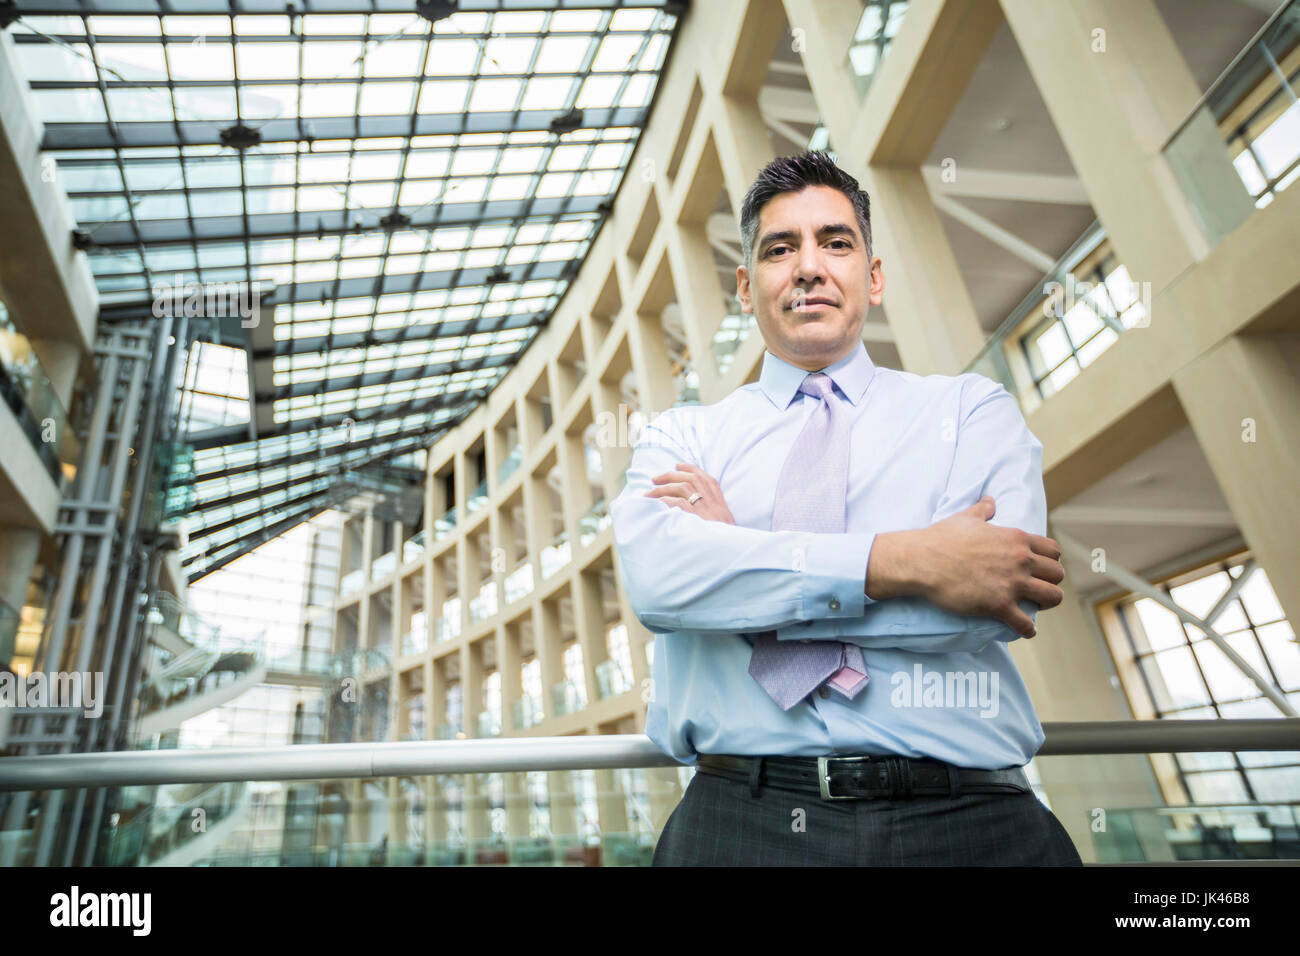 Serious Mixed Race businessman posing in lobby Stock Photo